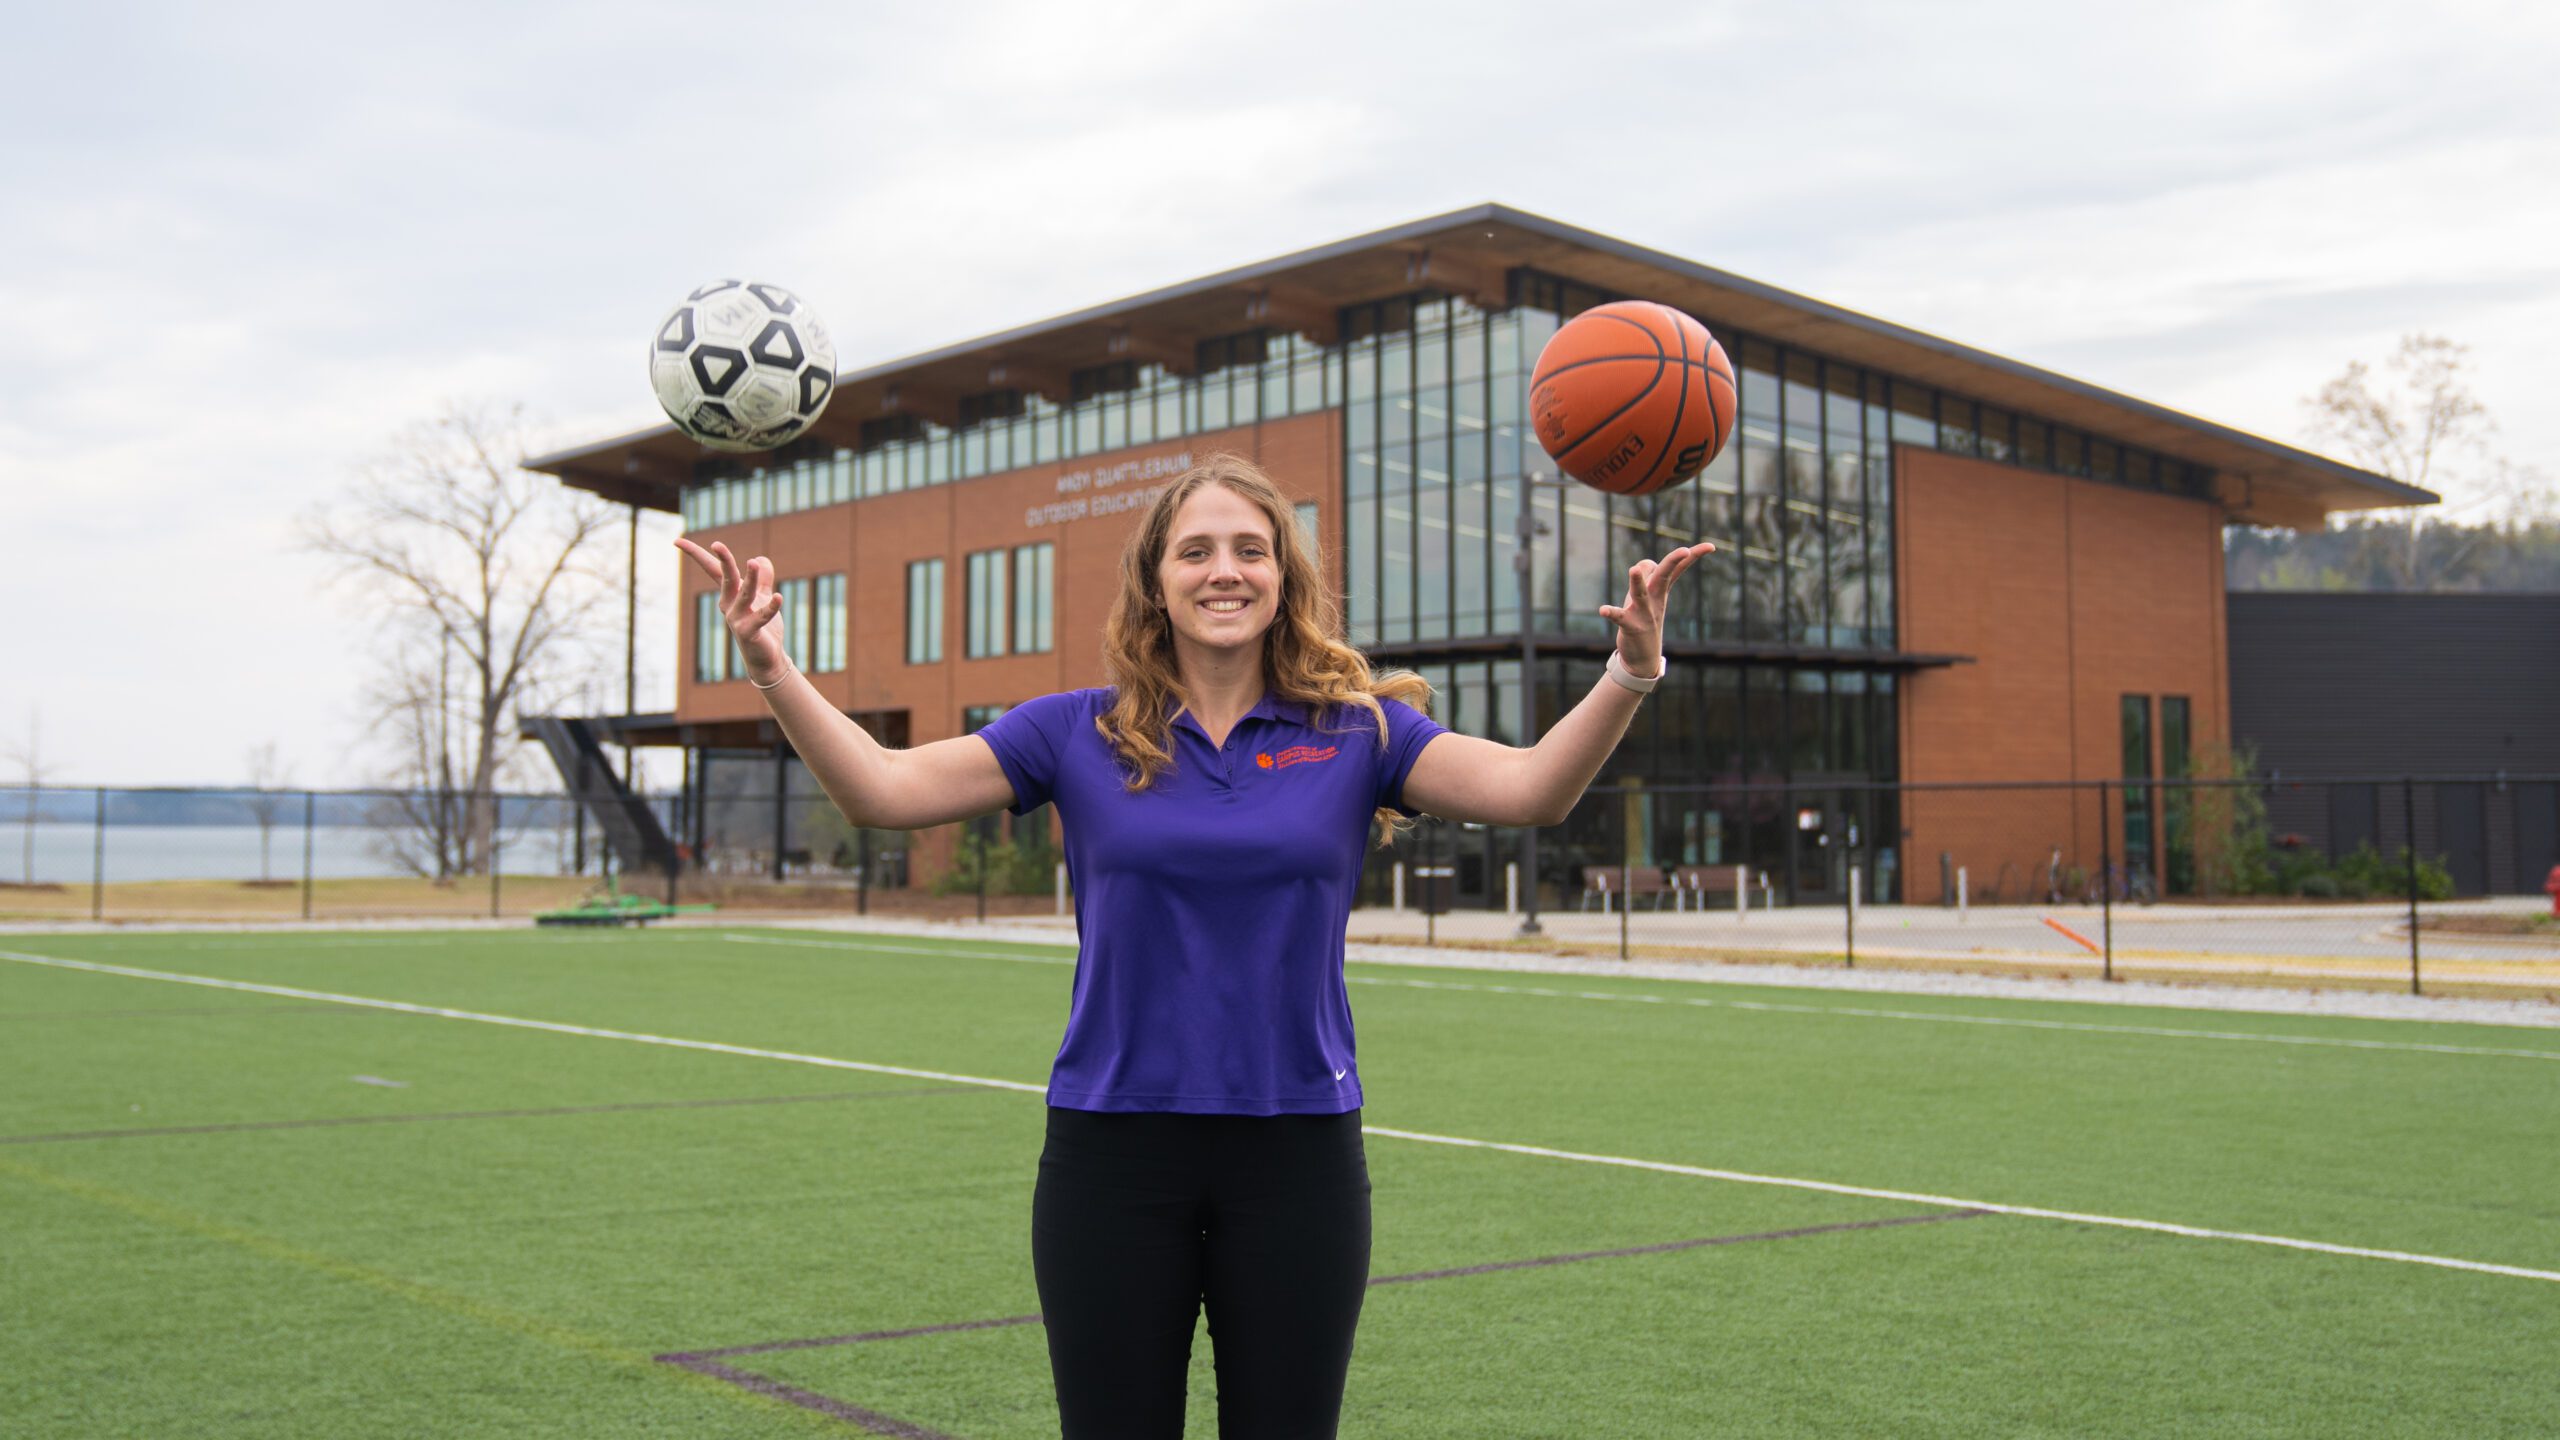 Ashley Schmidt is a graduate assistant with Campus Recreation at Clemson